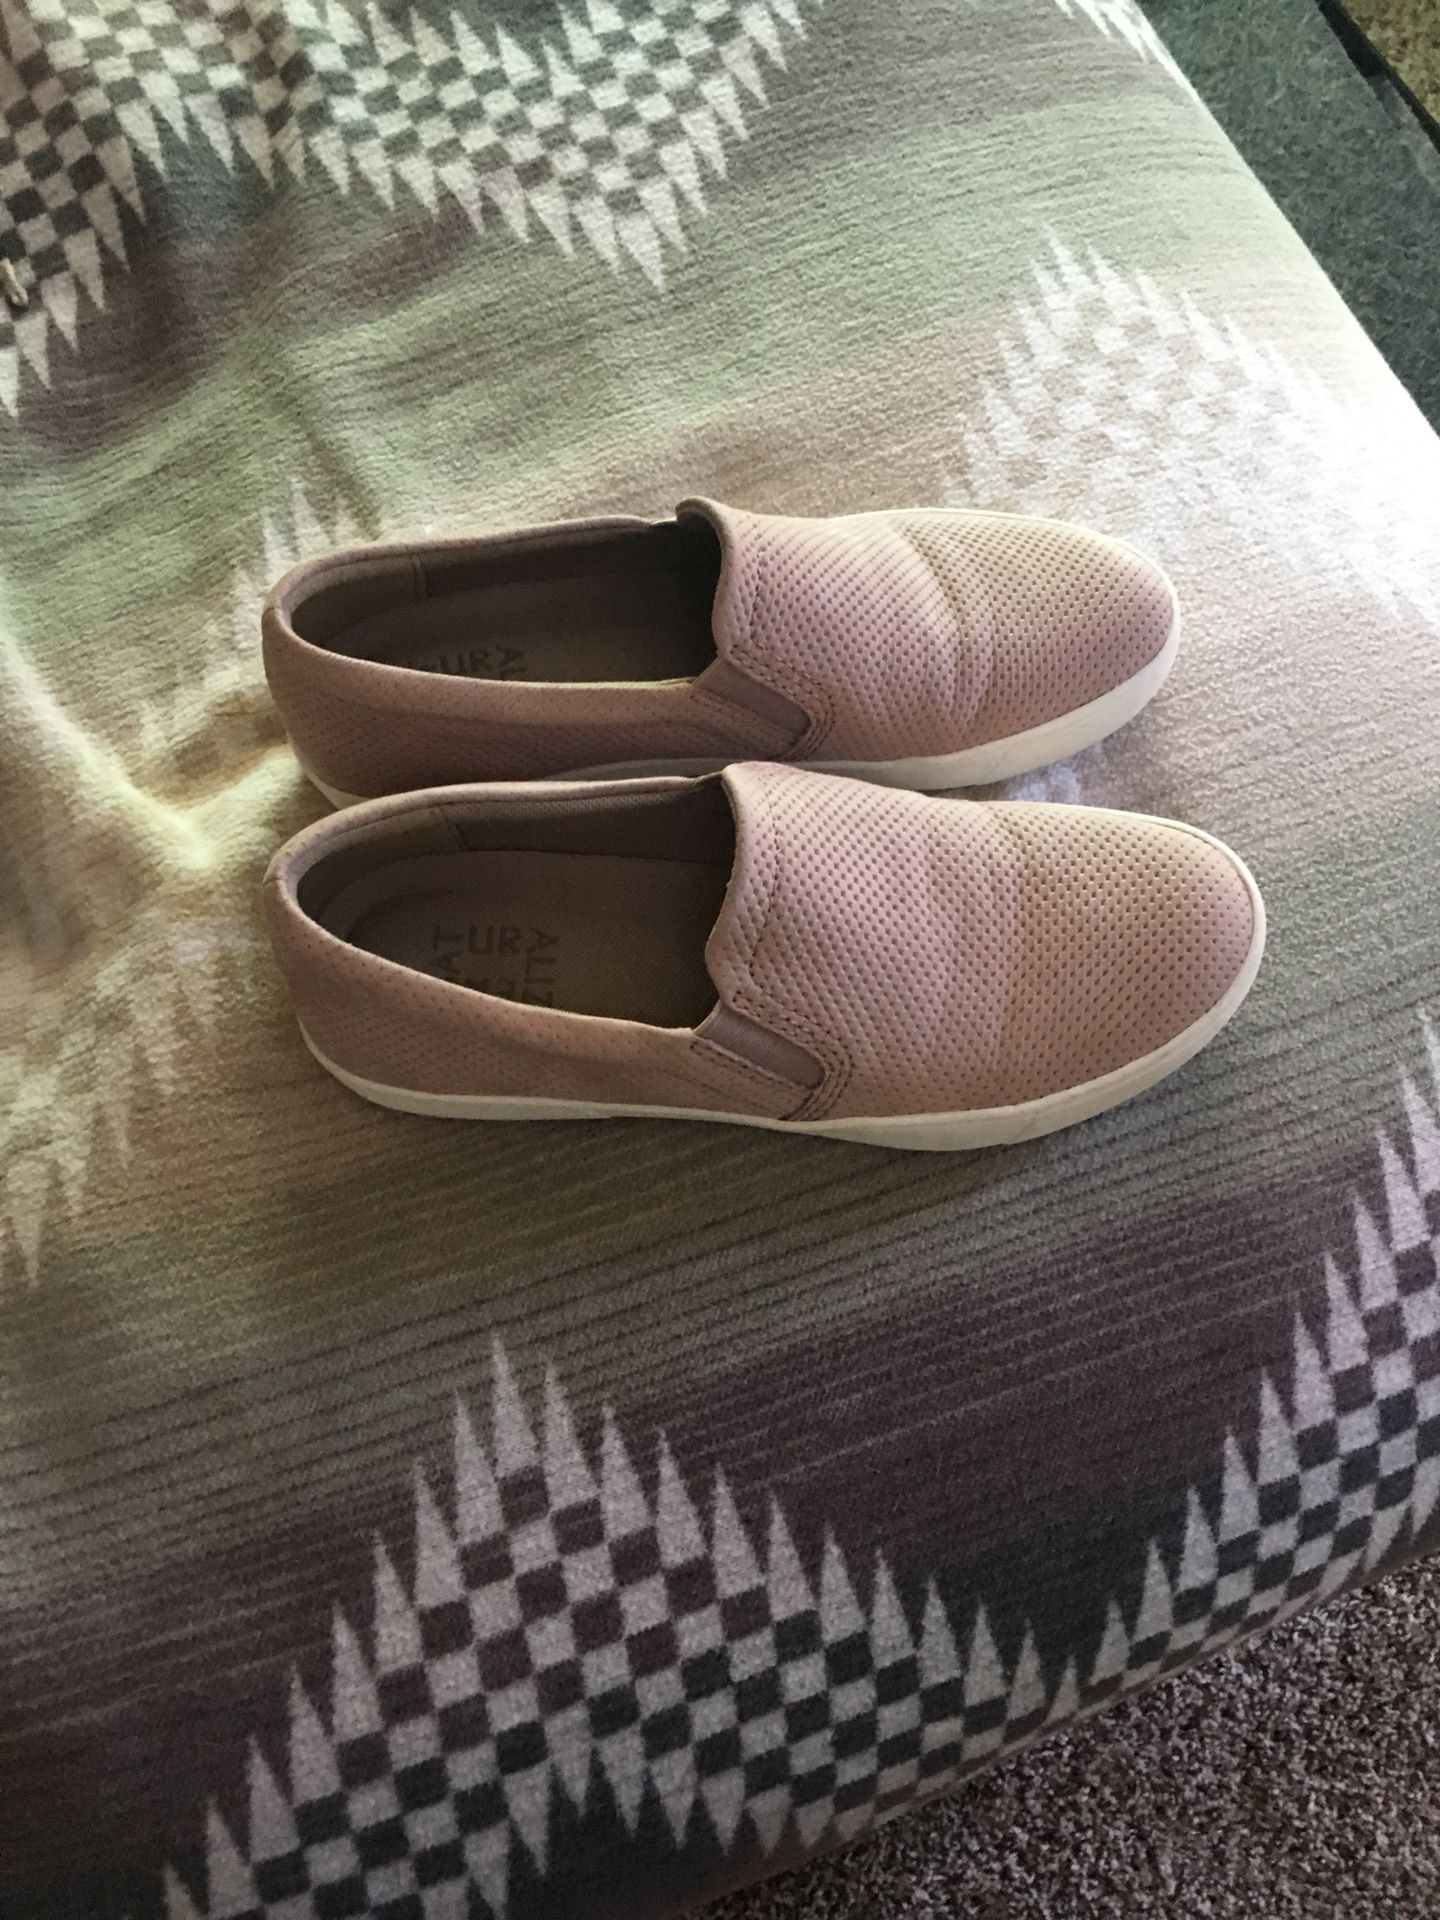 Cute mauve slip on leather shoe by Naturalizer